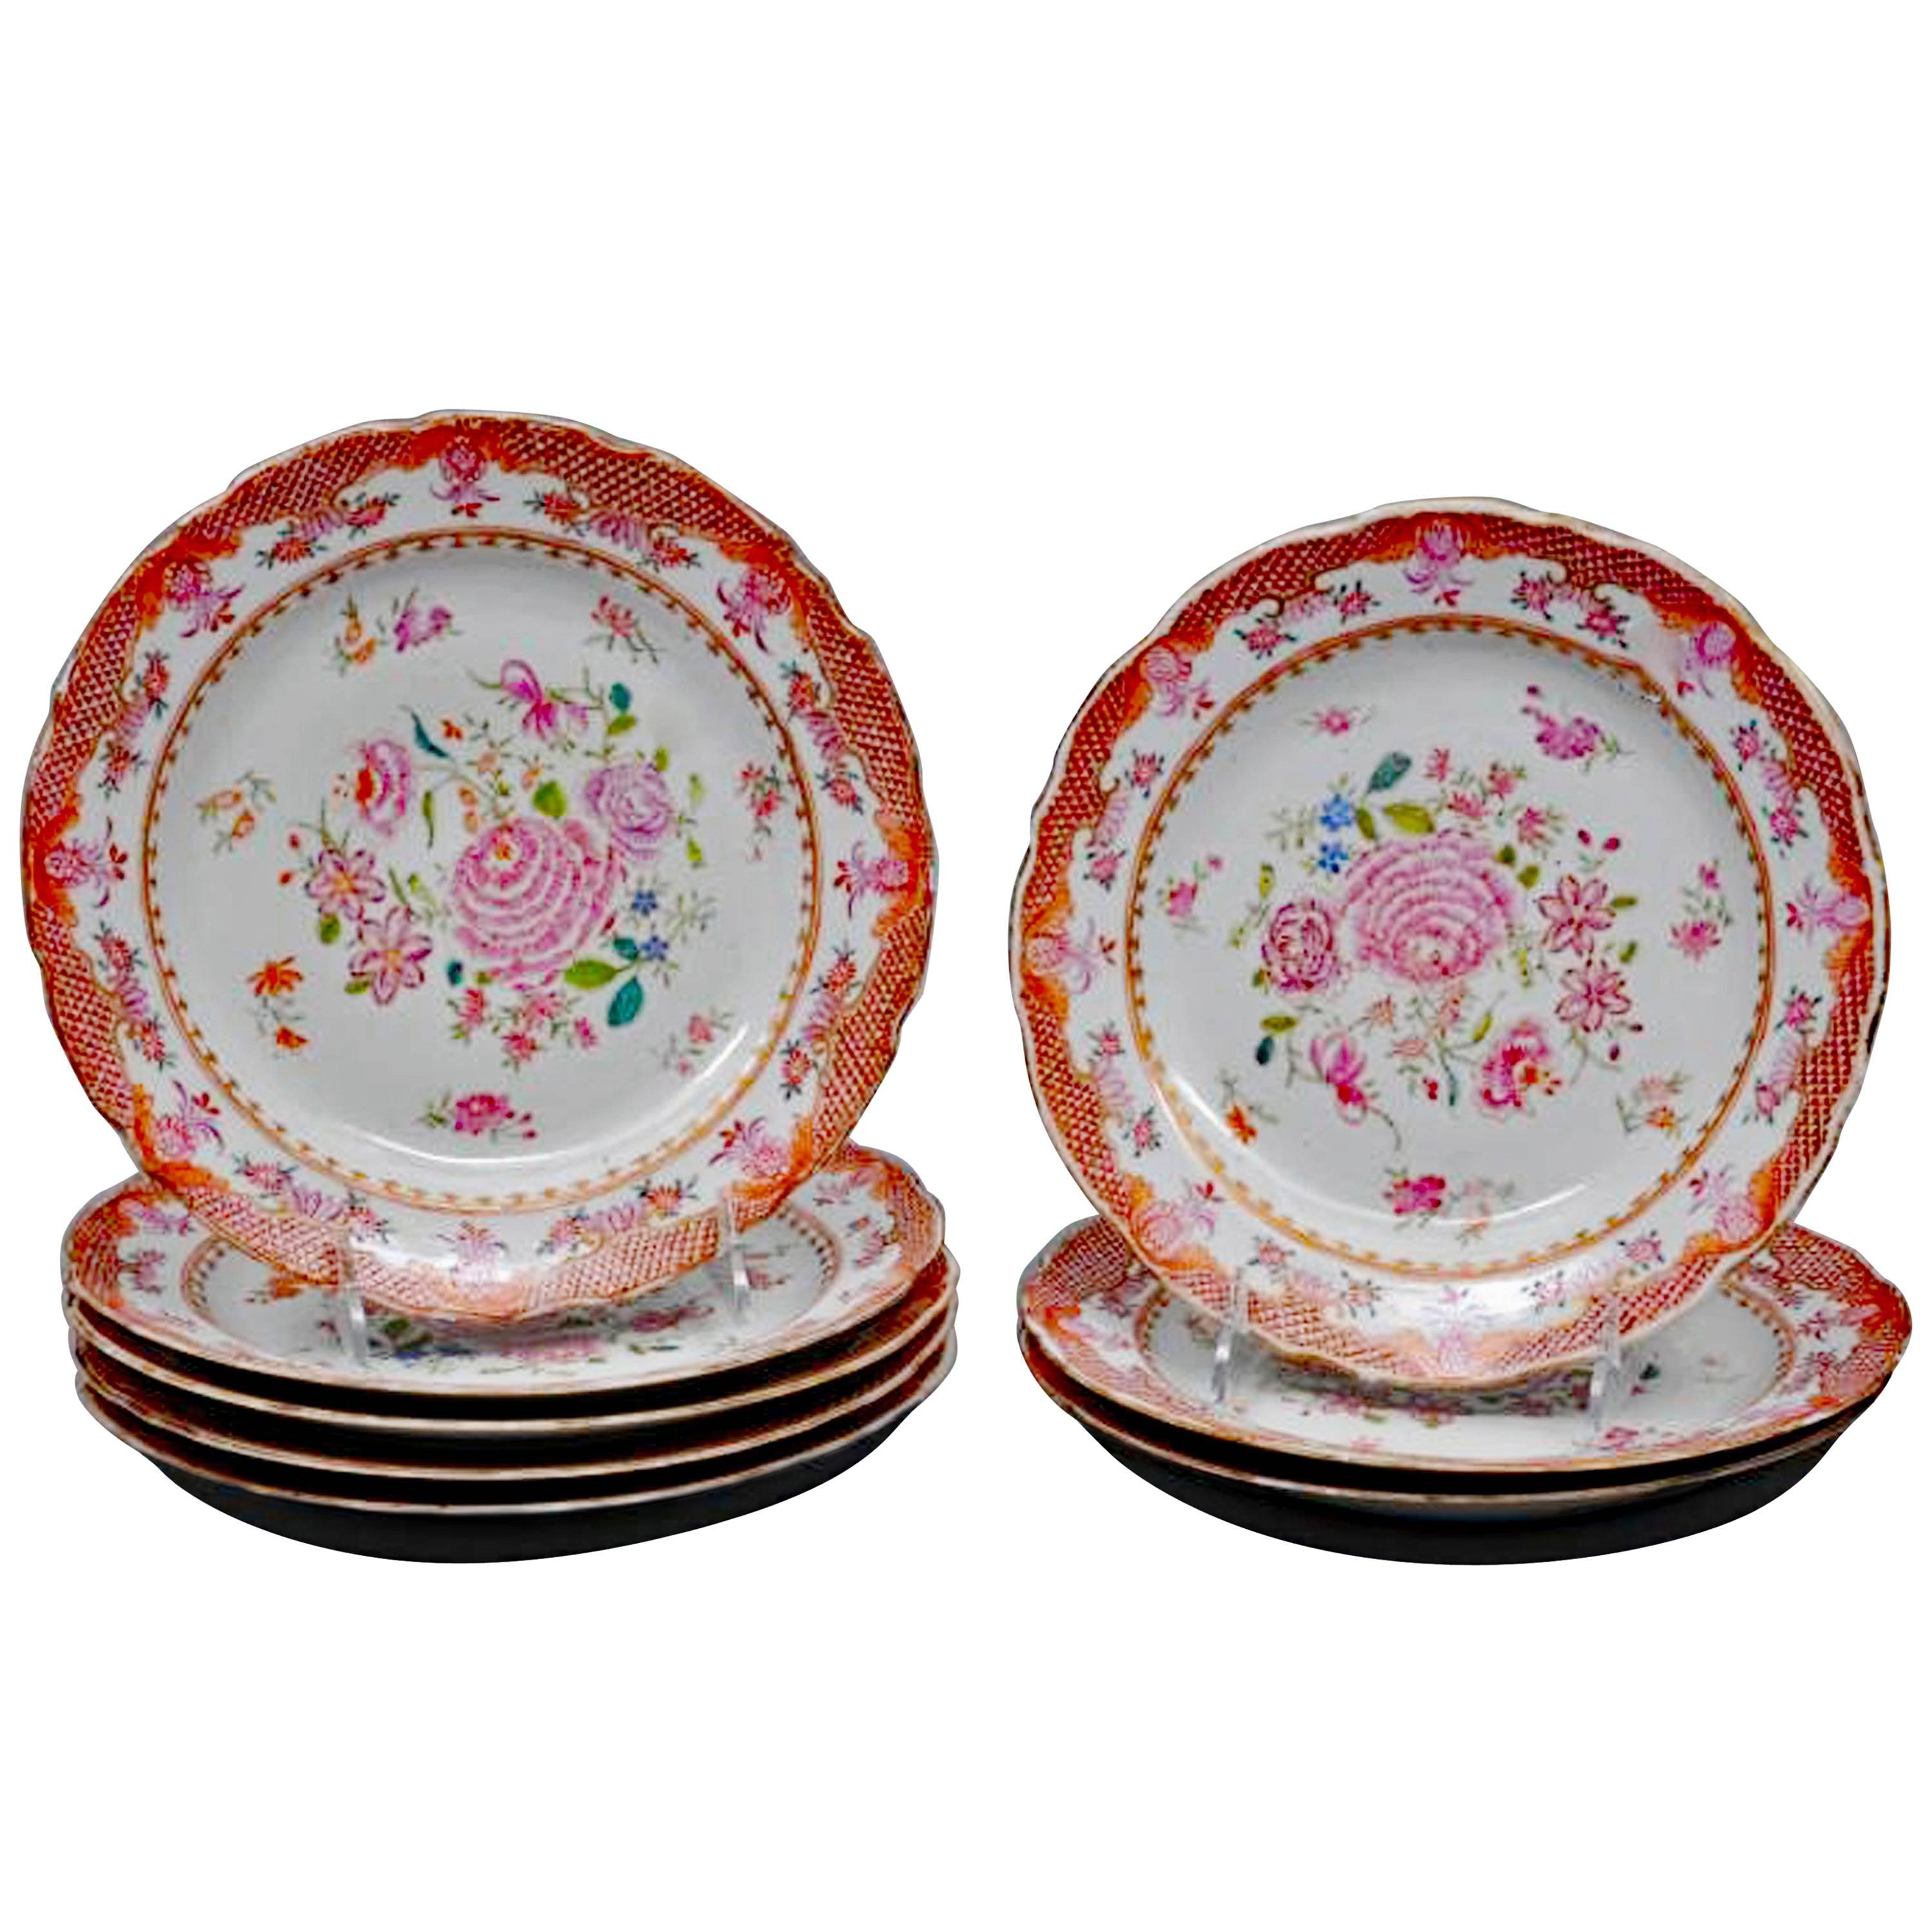 Chinese Export Famille Rose Set of 16 Plates, circa 1775-1785